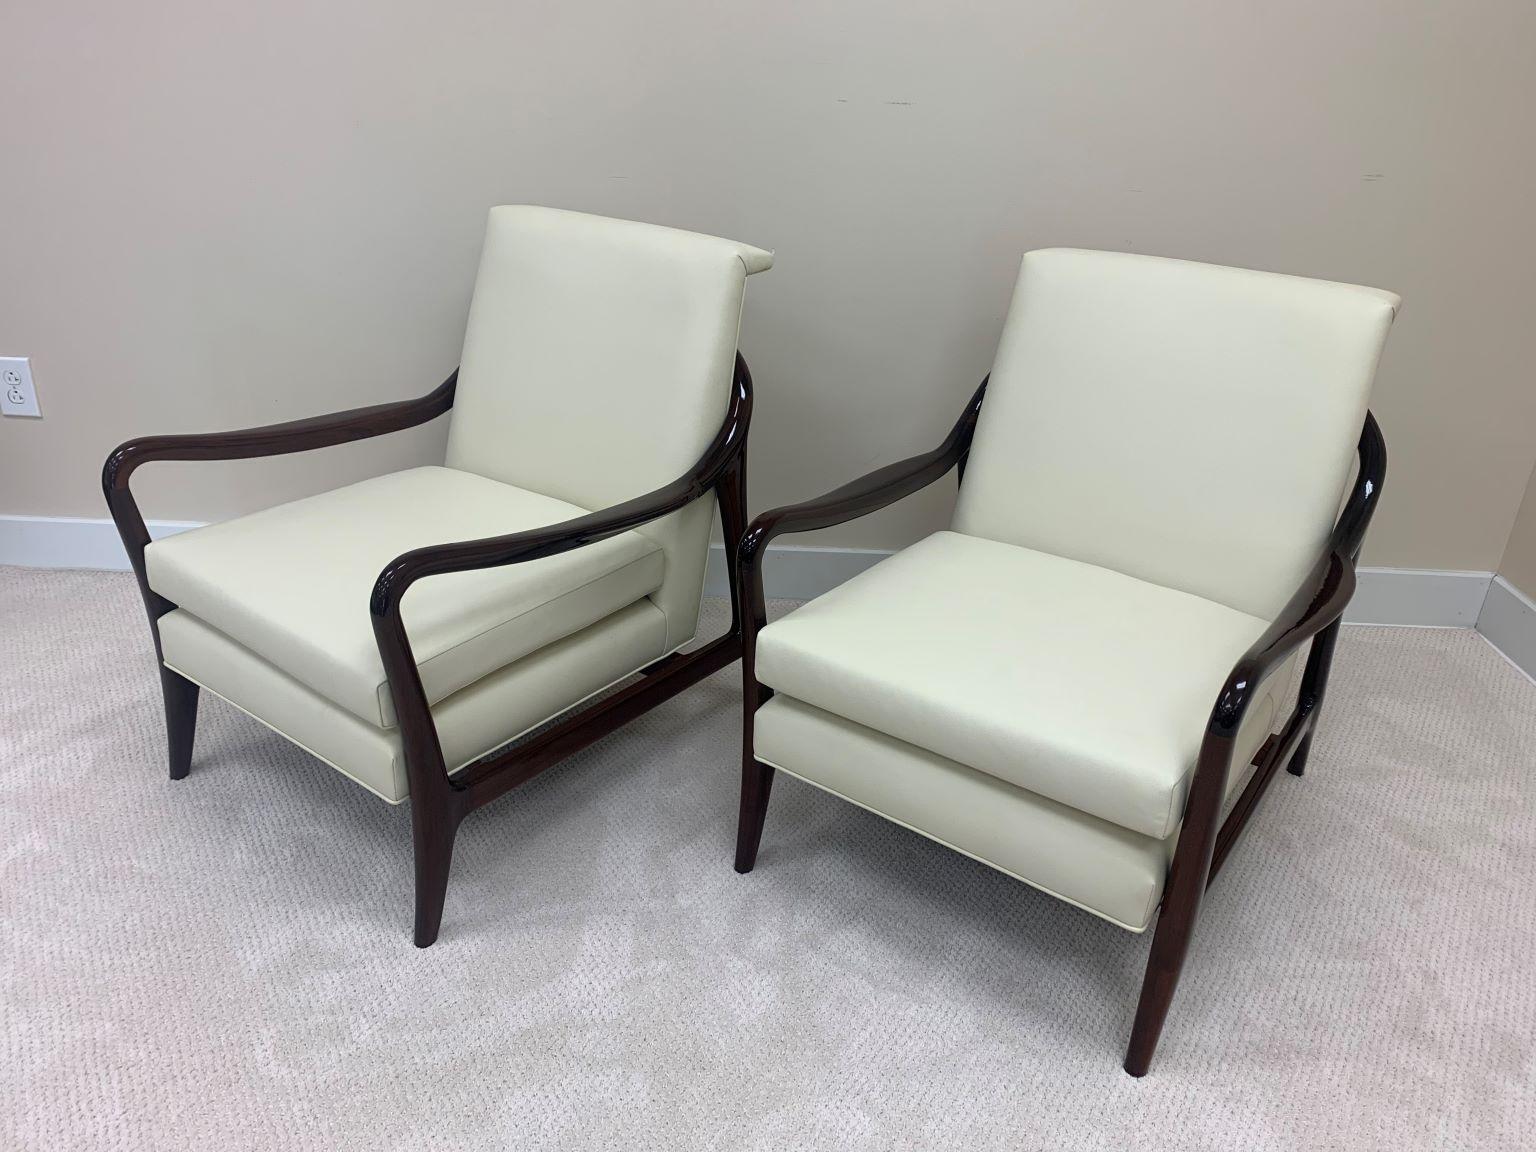 American Pair of Sculptural Mid-Century Kagan Style Walnut and Leather Lounge Chairs